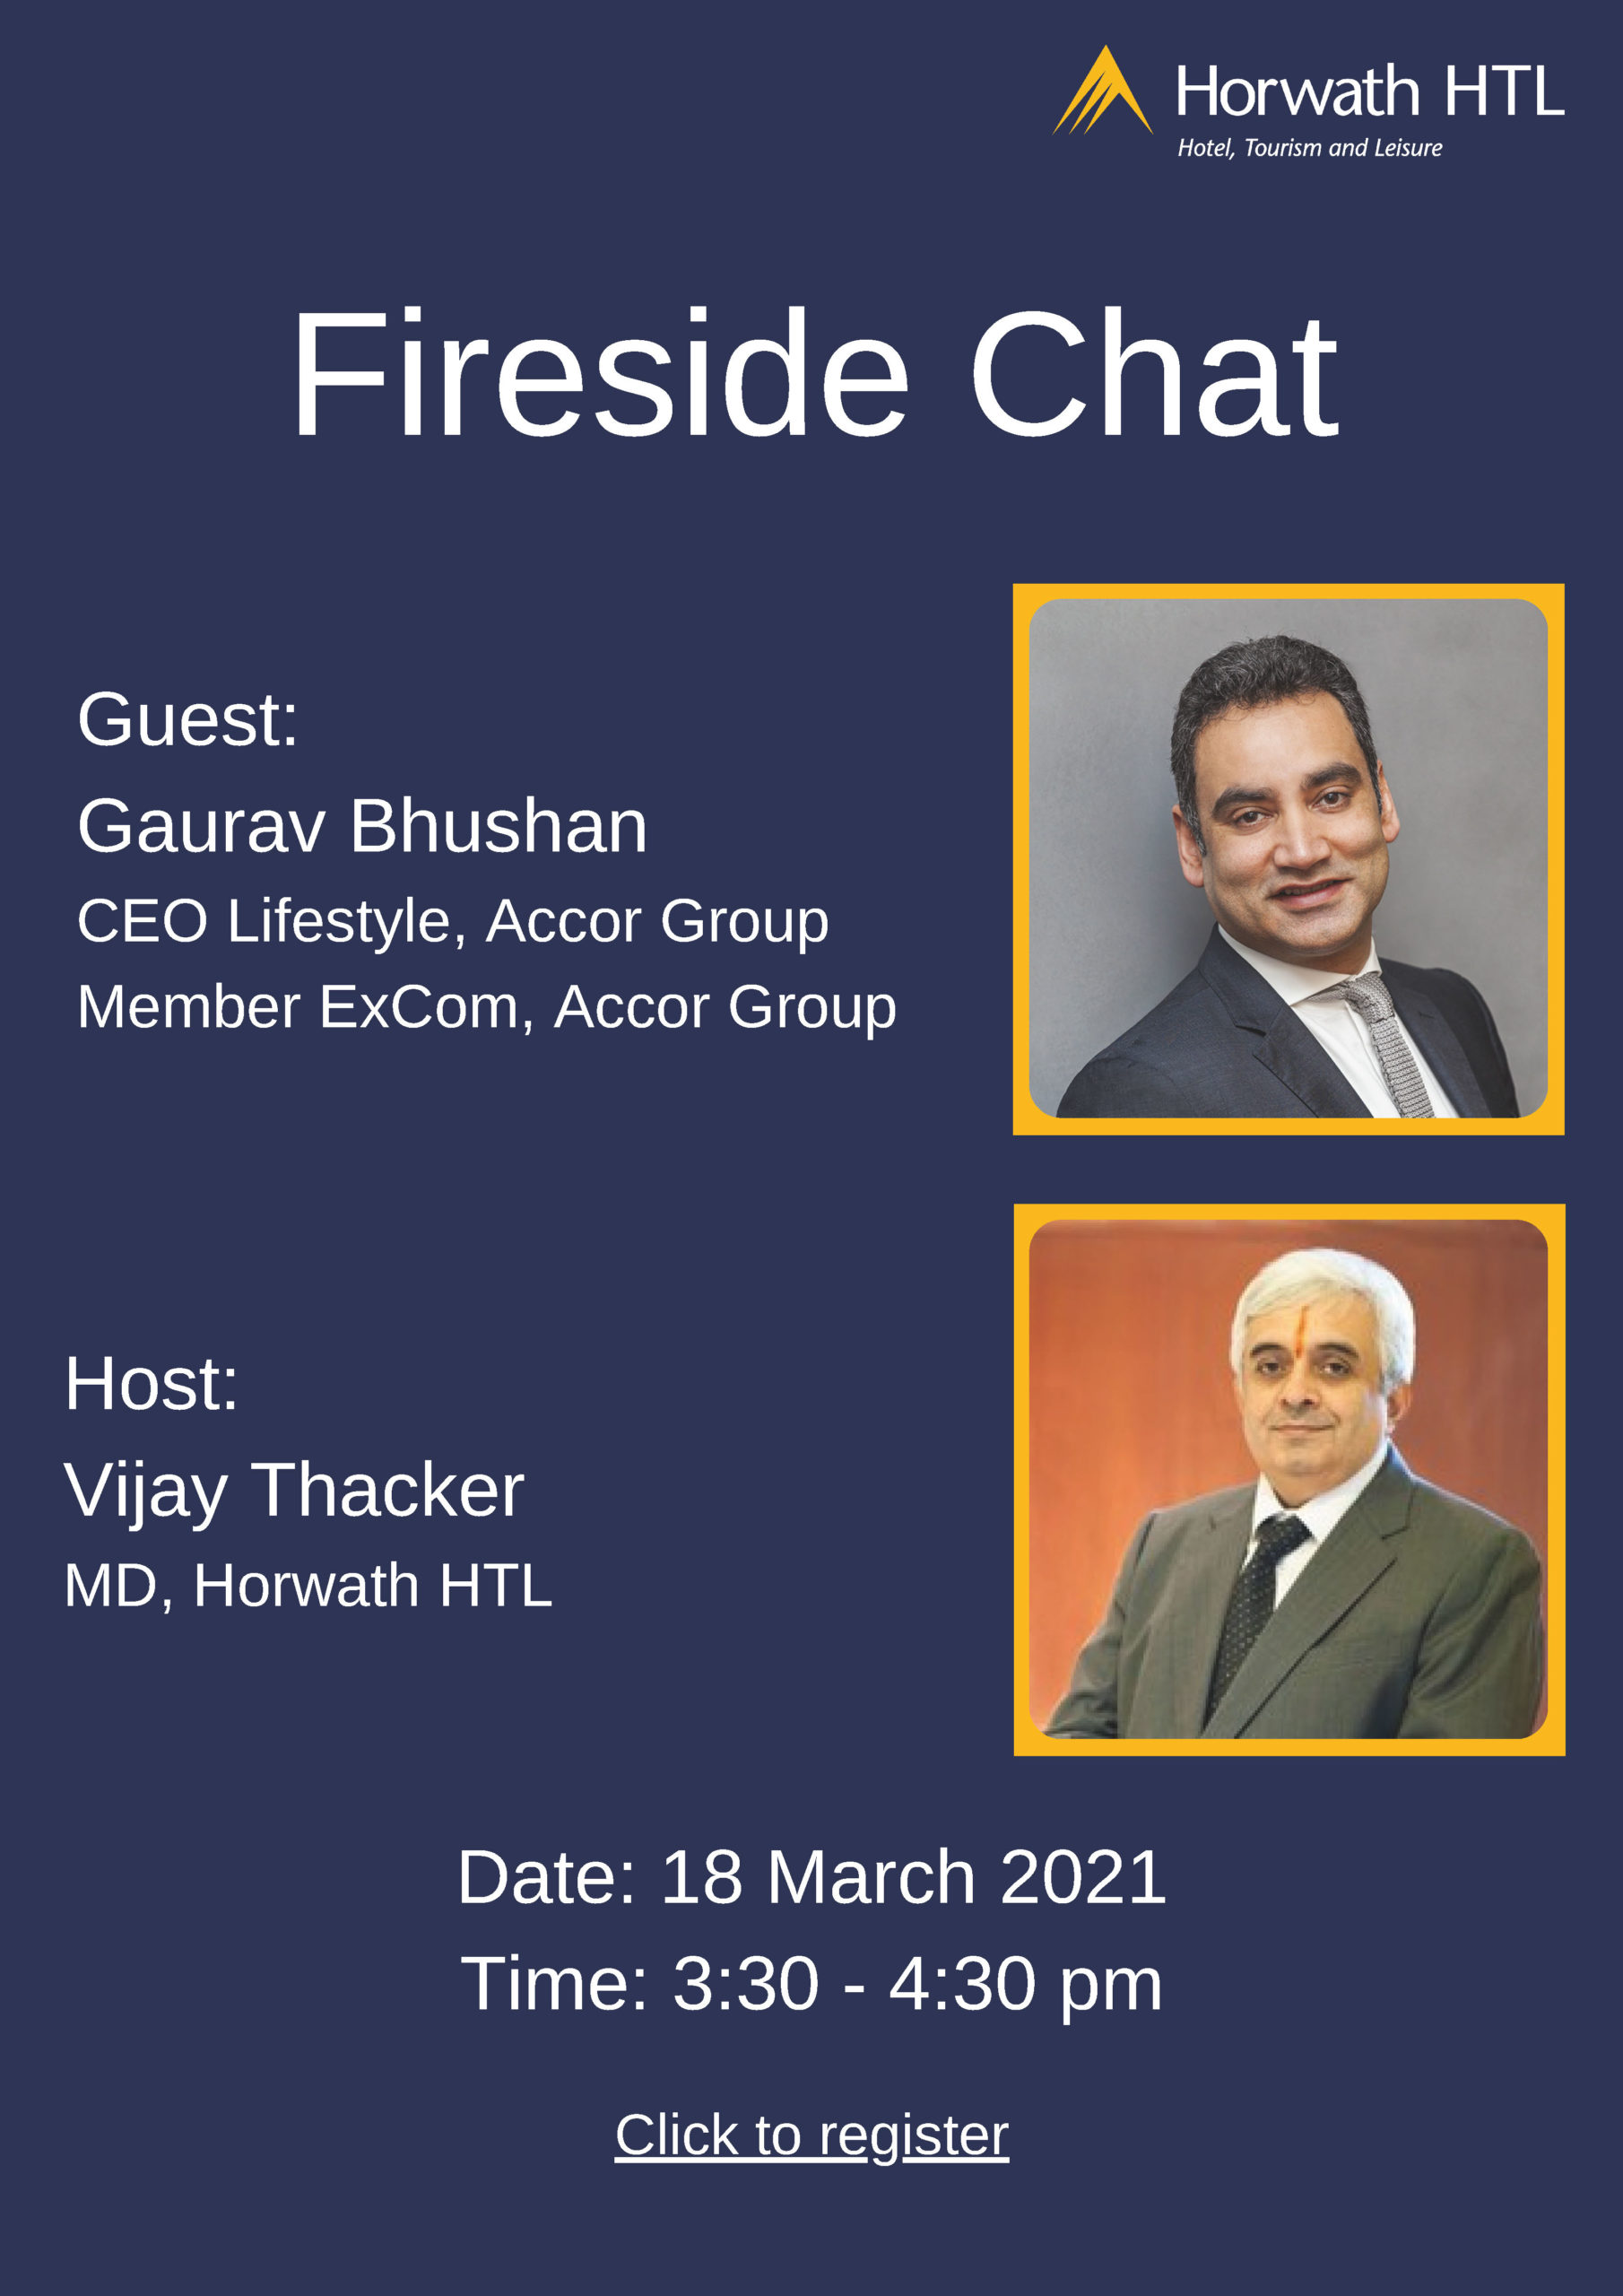 Horwath HTL India: A Fireside Chat with Gaurav Bhushan